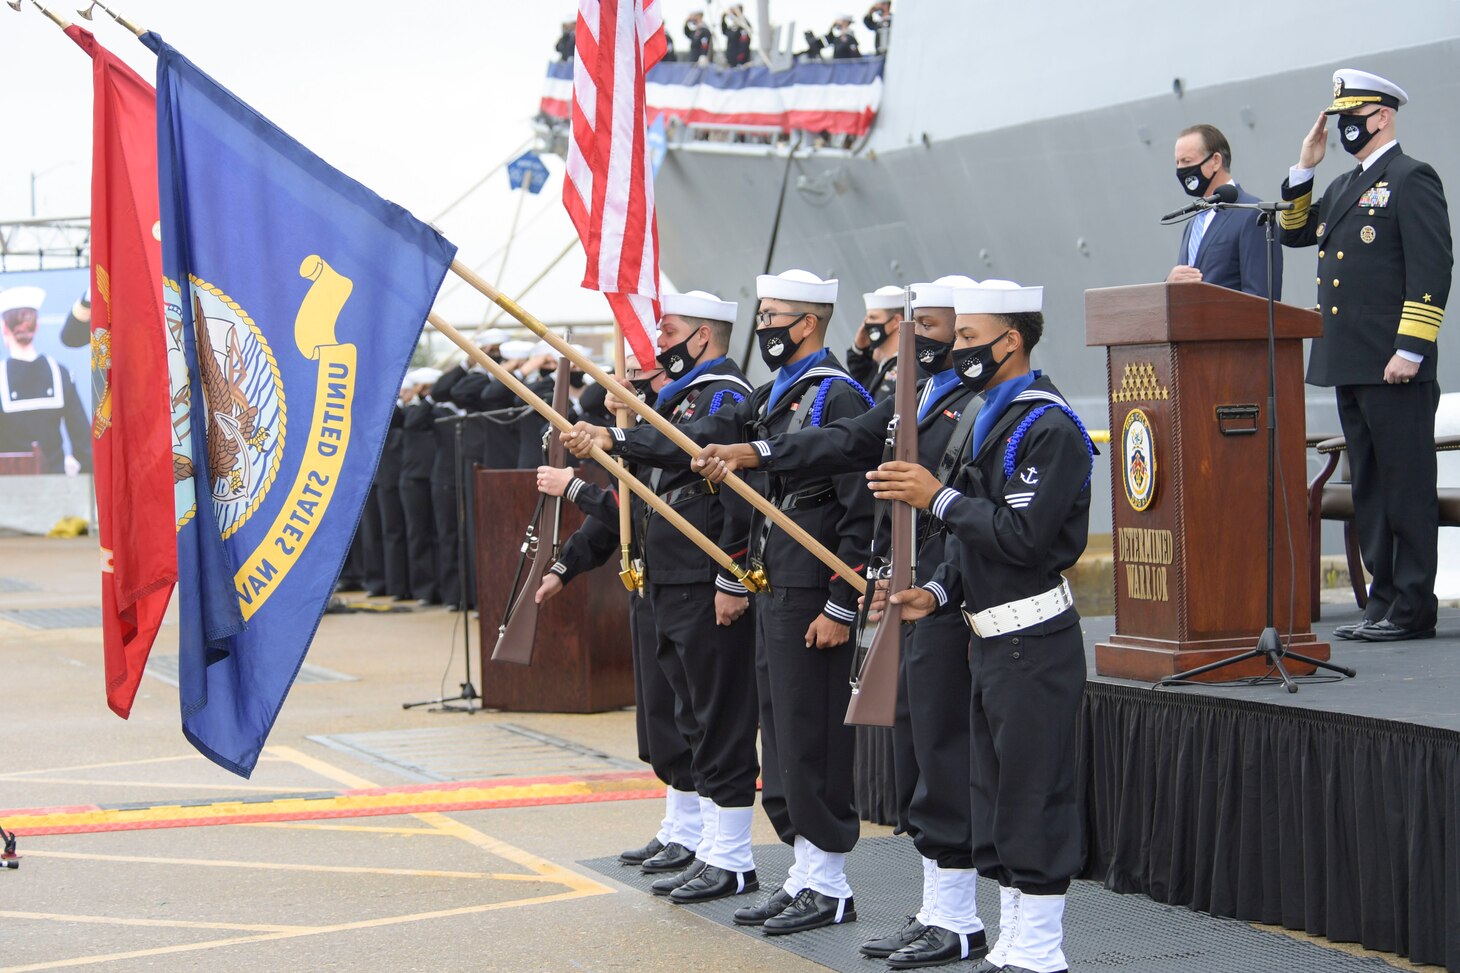 The USS Cole Color Guard parades the colors during the National Anthem at the Arleigh Burke-class guided missile destroyer USS Cole (DDG 67) 20th Anniversary memorial ceremony at Naval Station Norfolk.